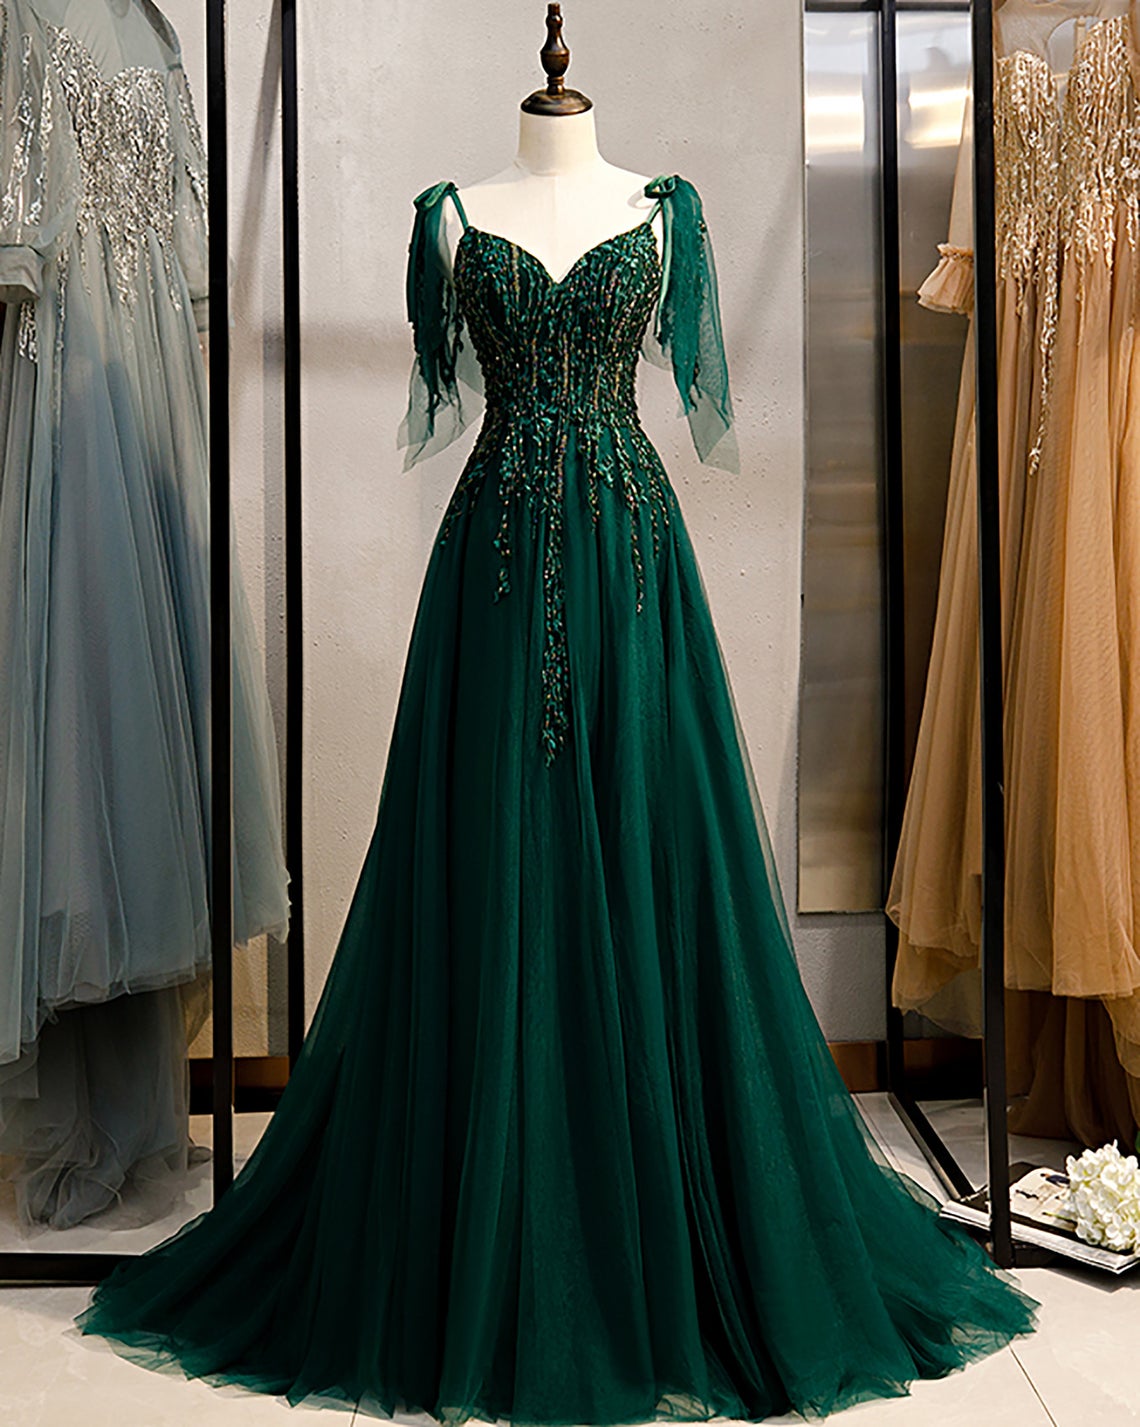 Emerald Green Spaghetti Straps Prom Dress Shinny Prom Dress Ball Gown A-line Wedding Dress Fairy Prom Gown Banquet Dress Formal Party